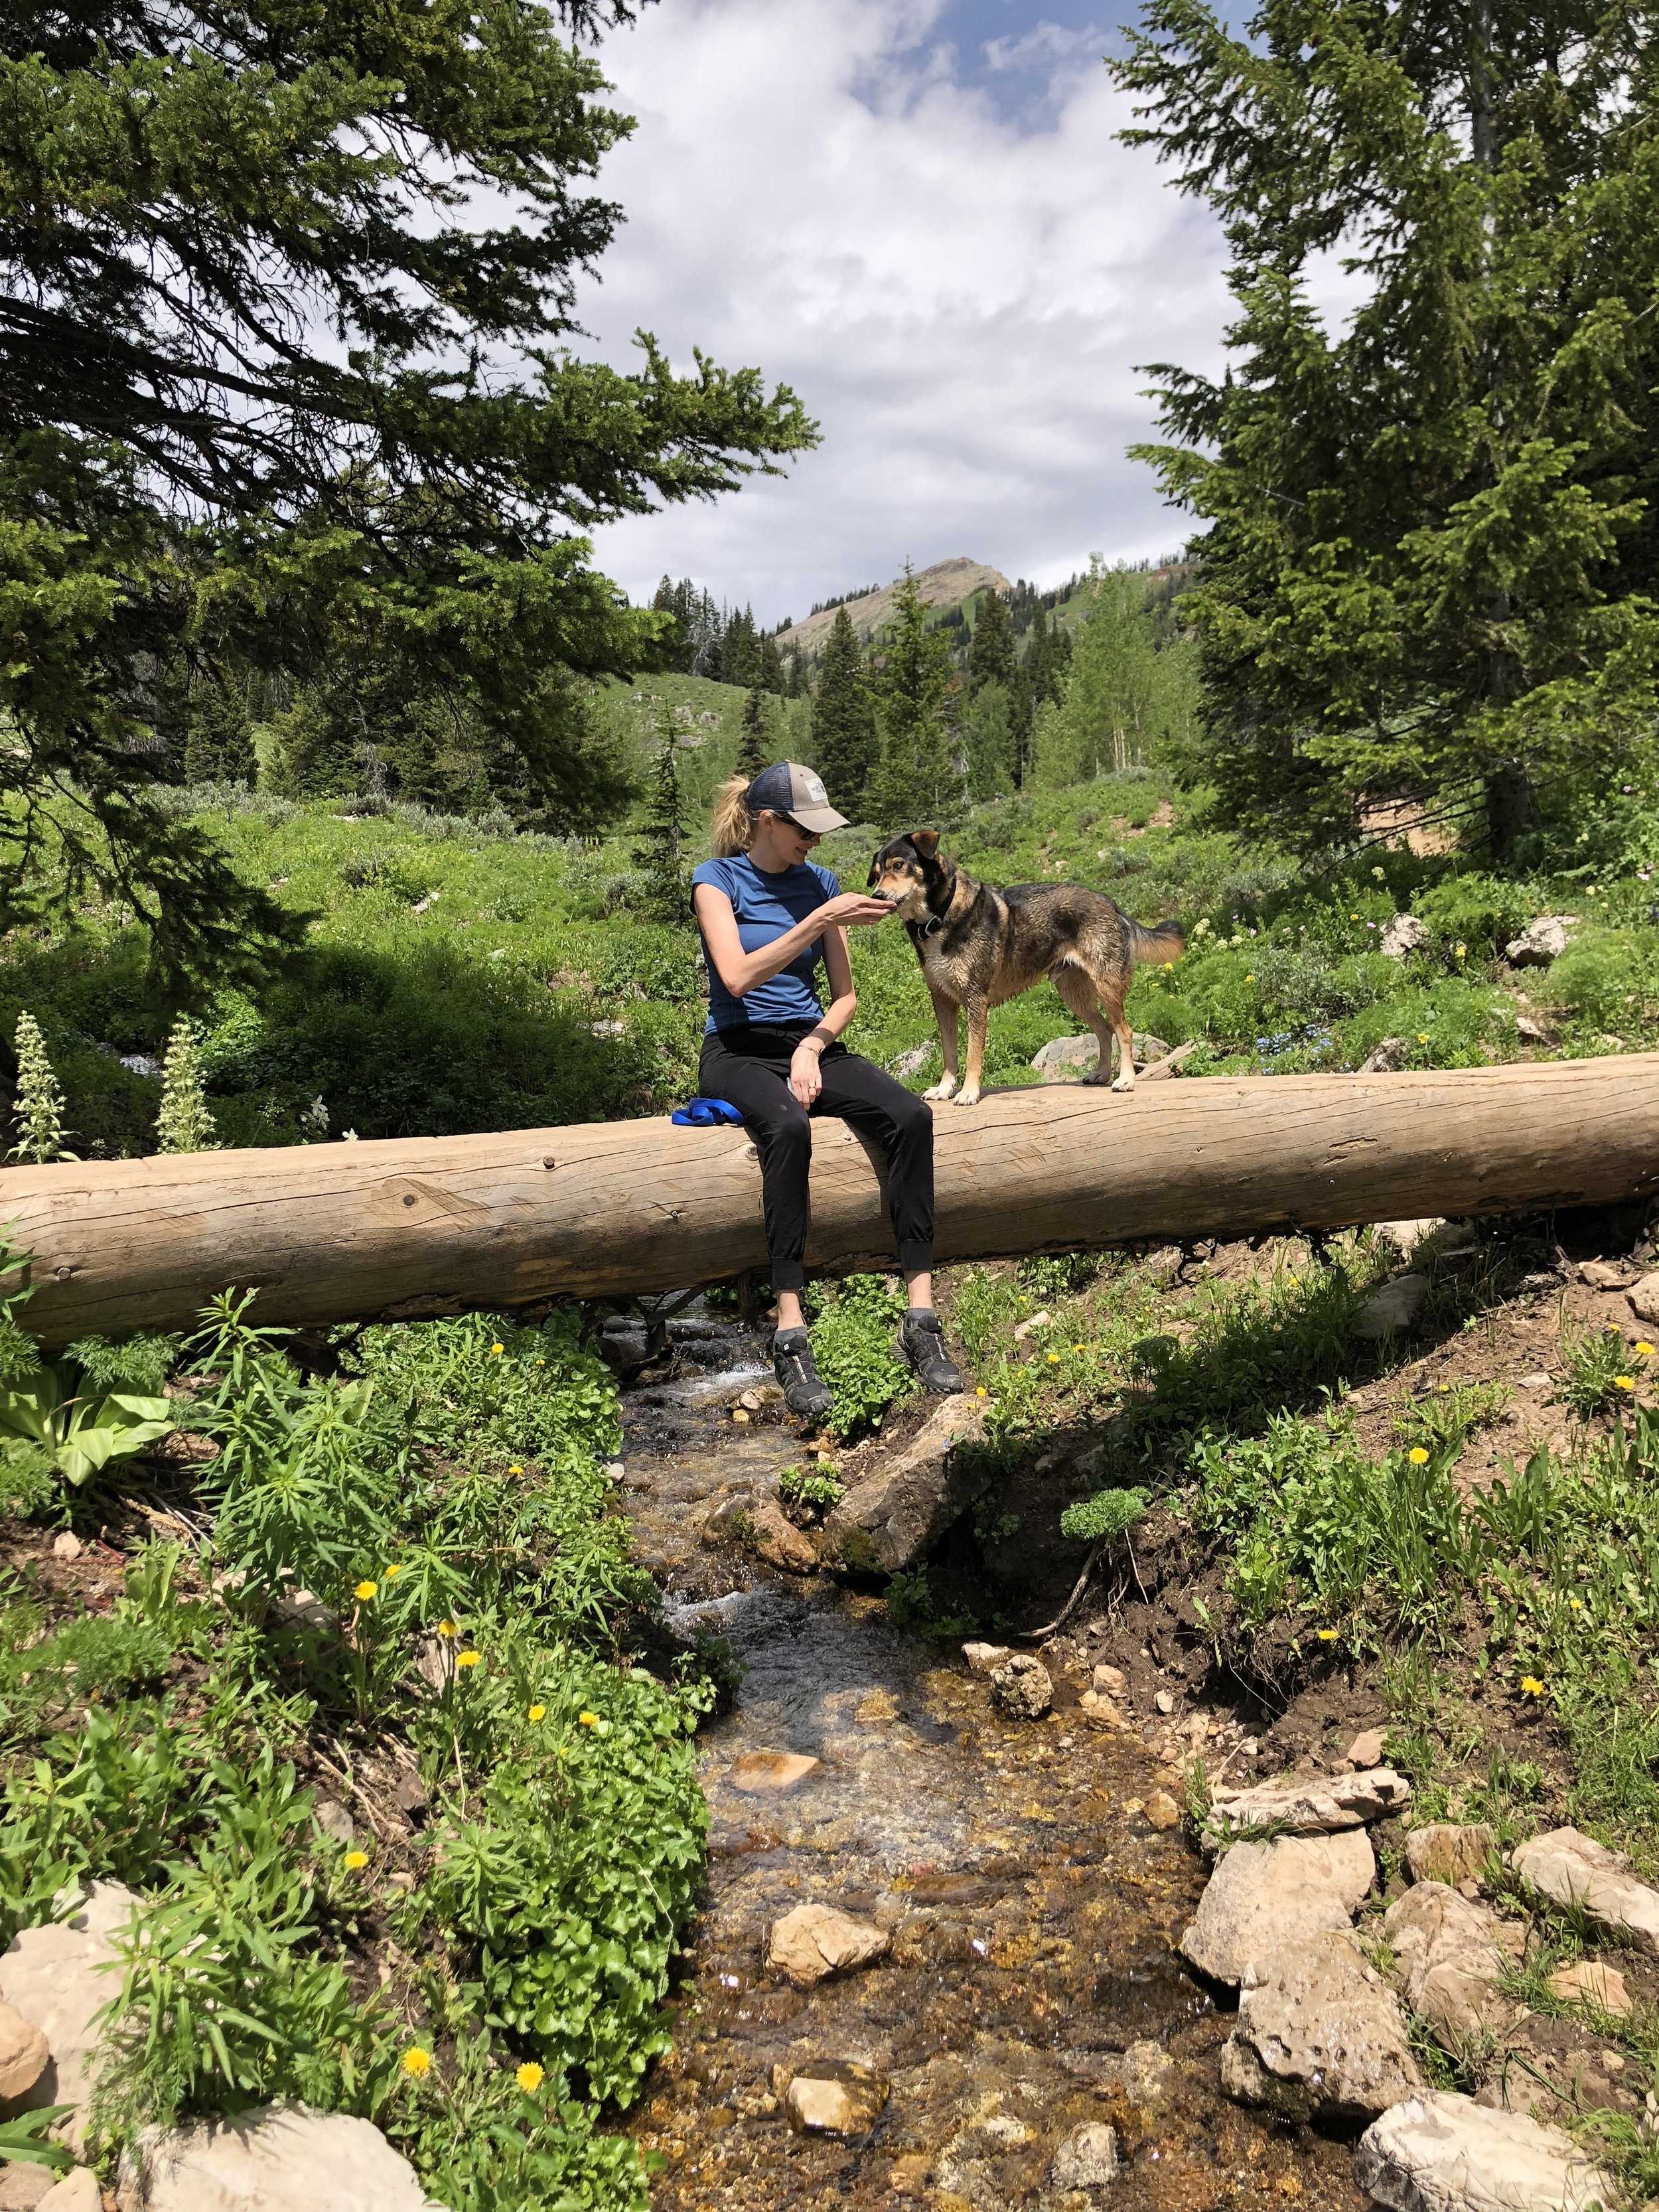 Emily's source of strength and happiness: Being in nature with her dogs